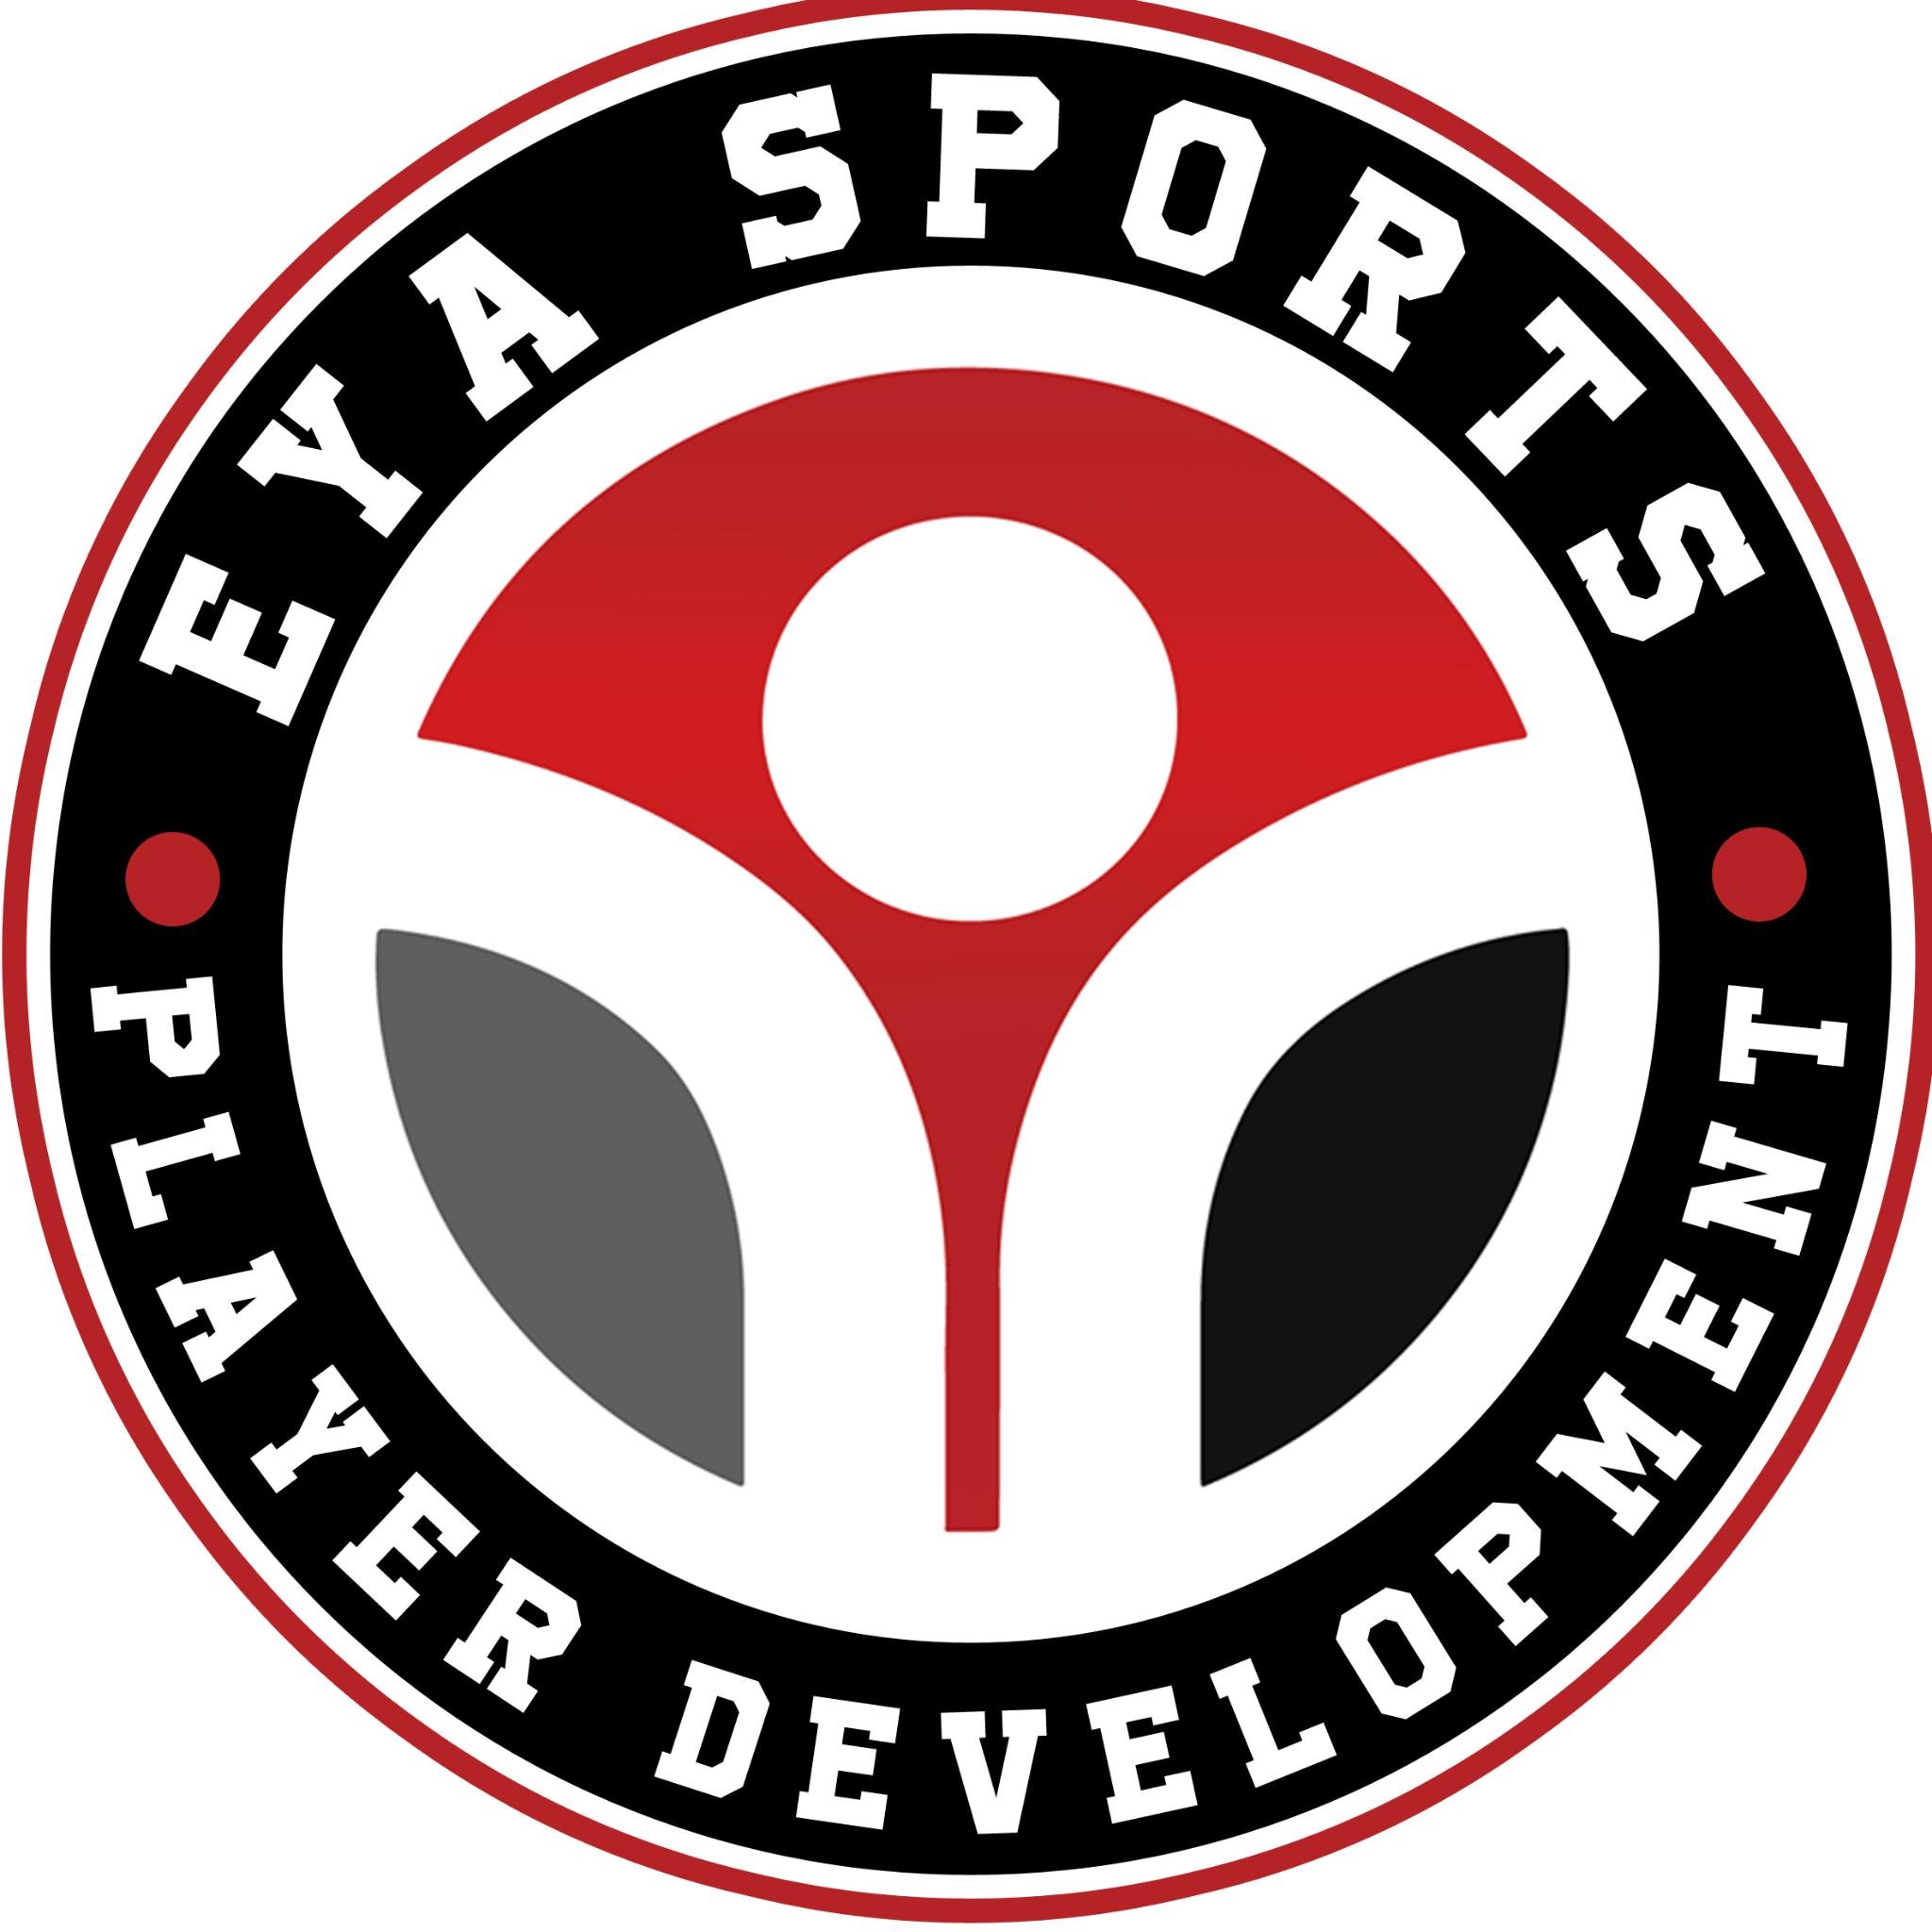 Don't hesitate to leave your feedback about our camps, training, scouting services, and media. We appreciate your support #EYASports